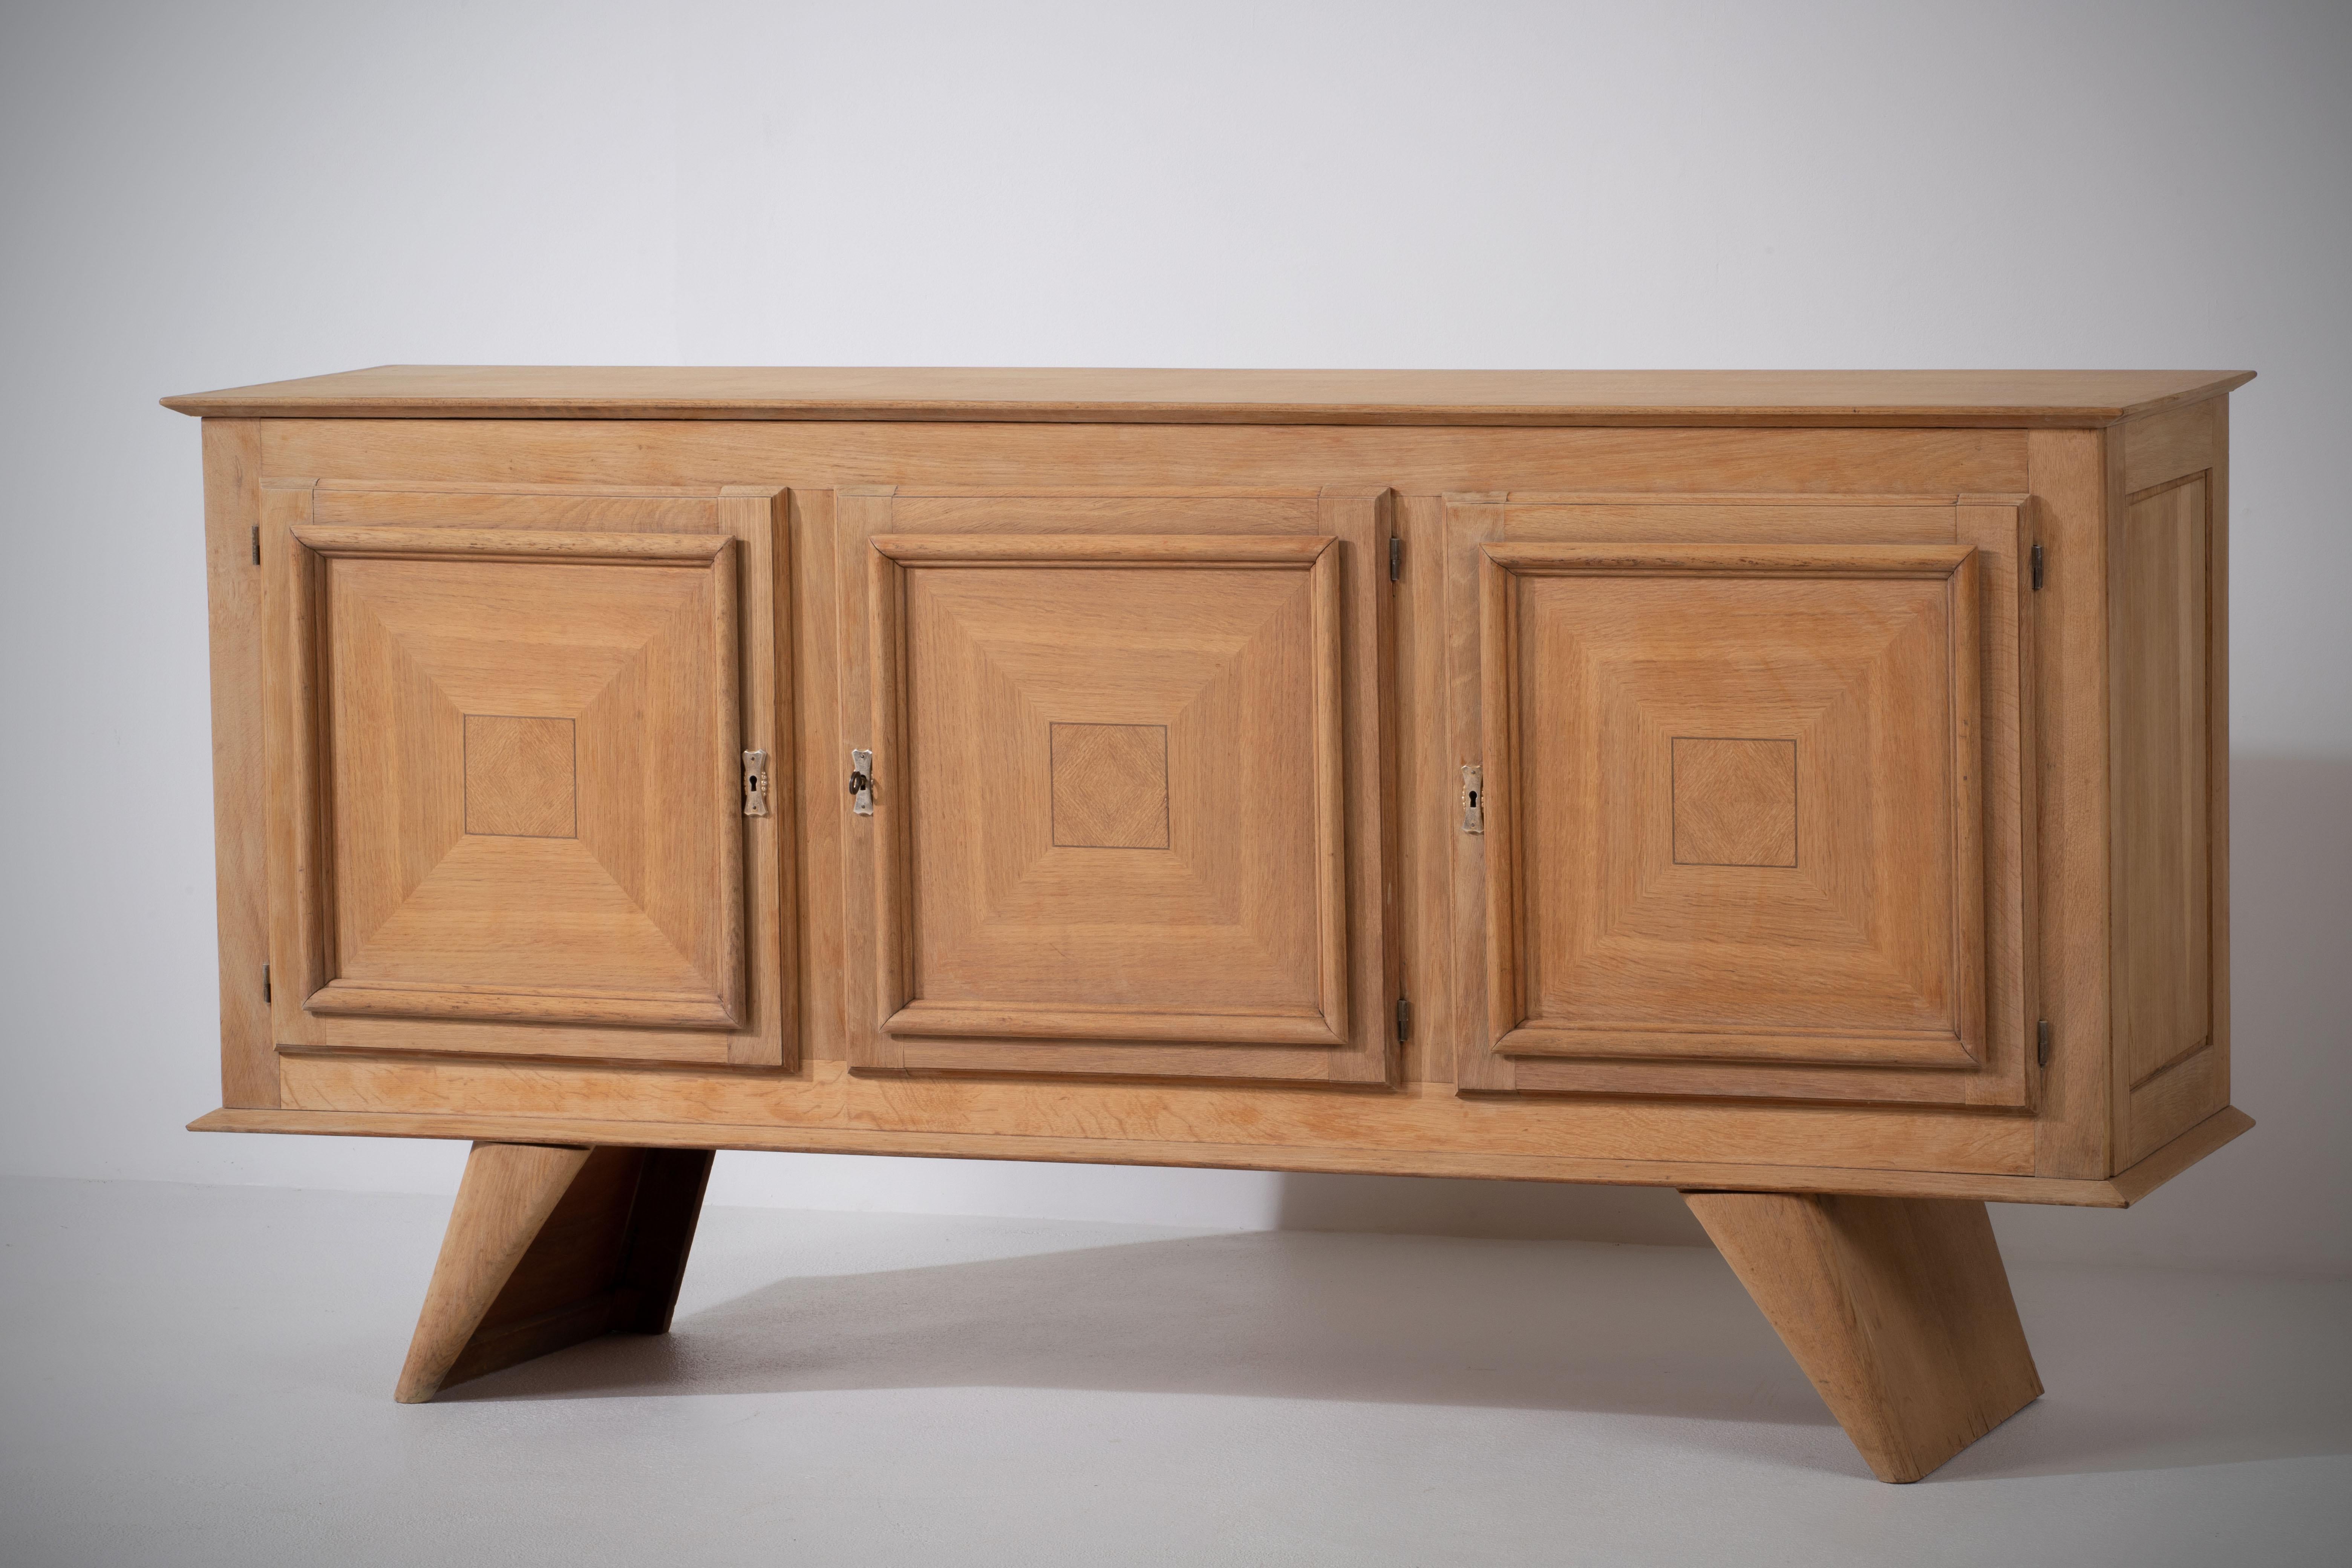 Introducing an extraordinary oak sideboard attributed to the renowned designer René Gabriel. This exceptional piece showcases Gabriel's signature style and attention to detail while highlighting the natural beauty of oak.

Crafted from solid oak,